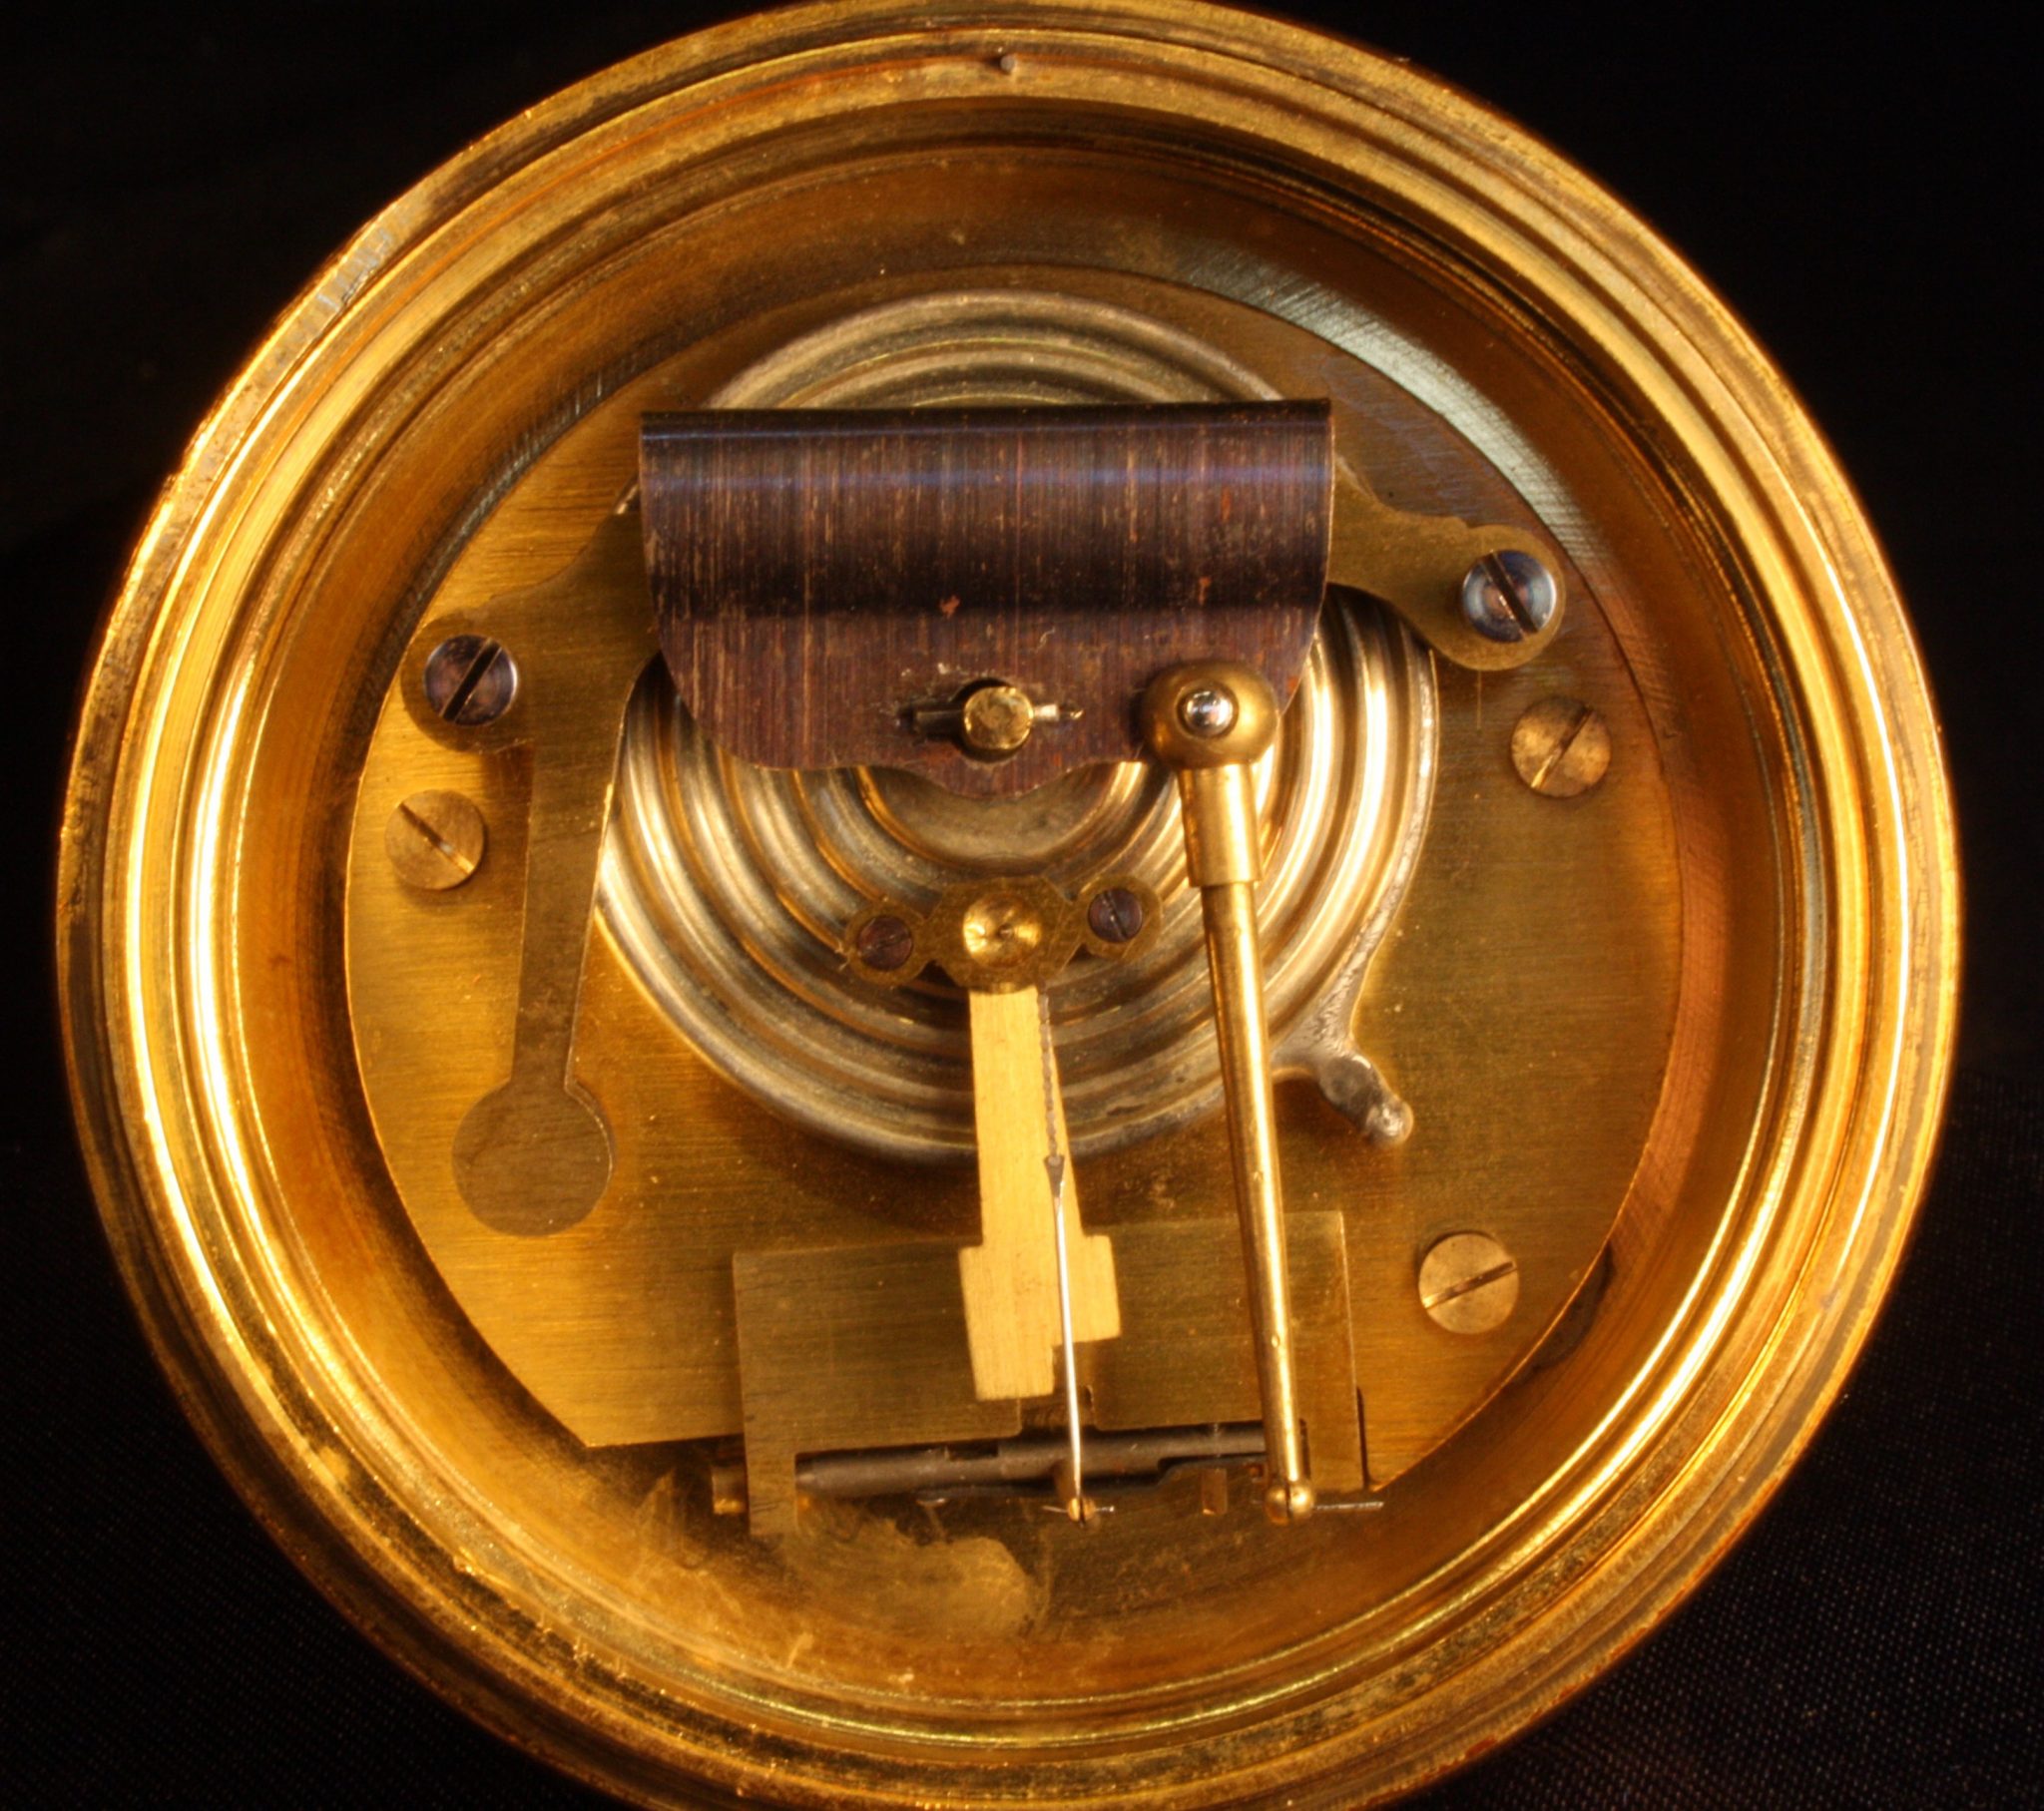 Image of Goulier Aviation Altimeter by Naudet